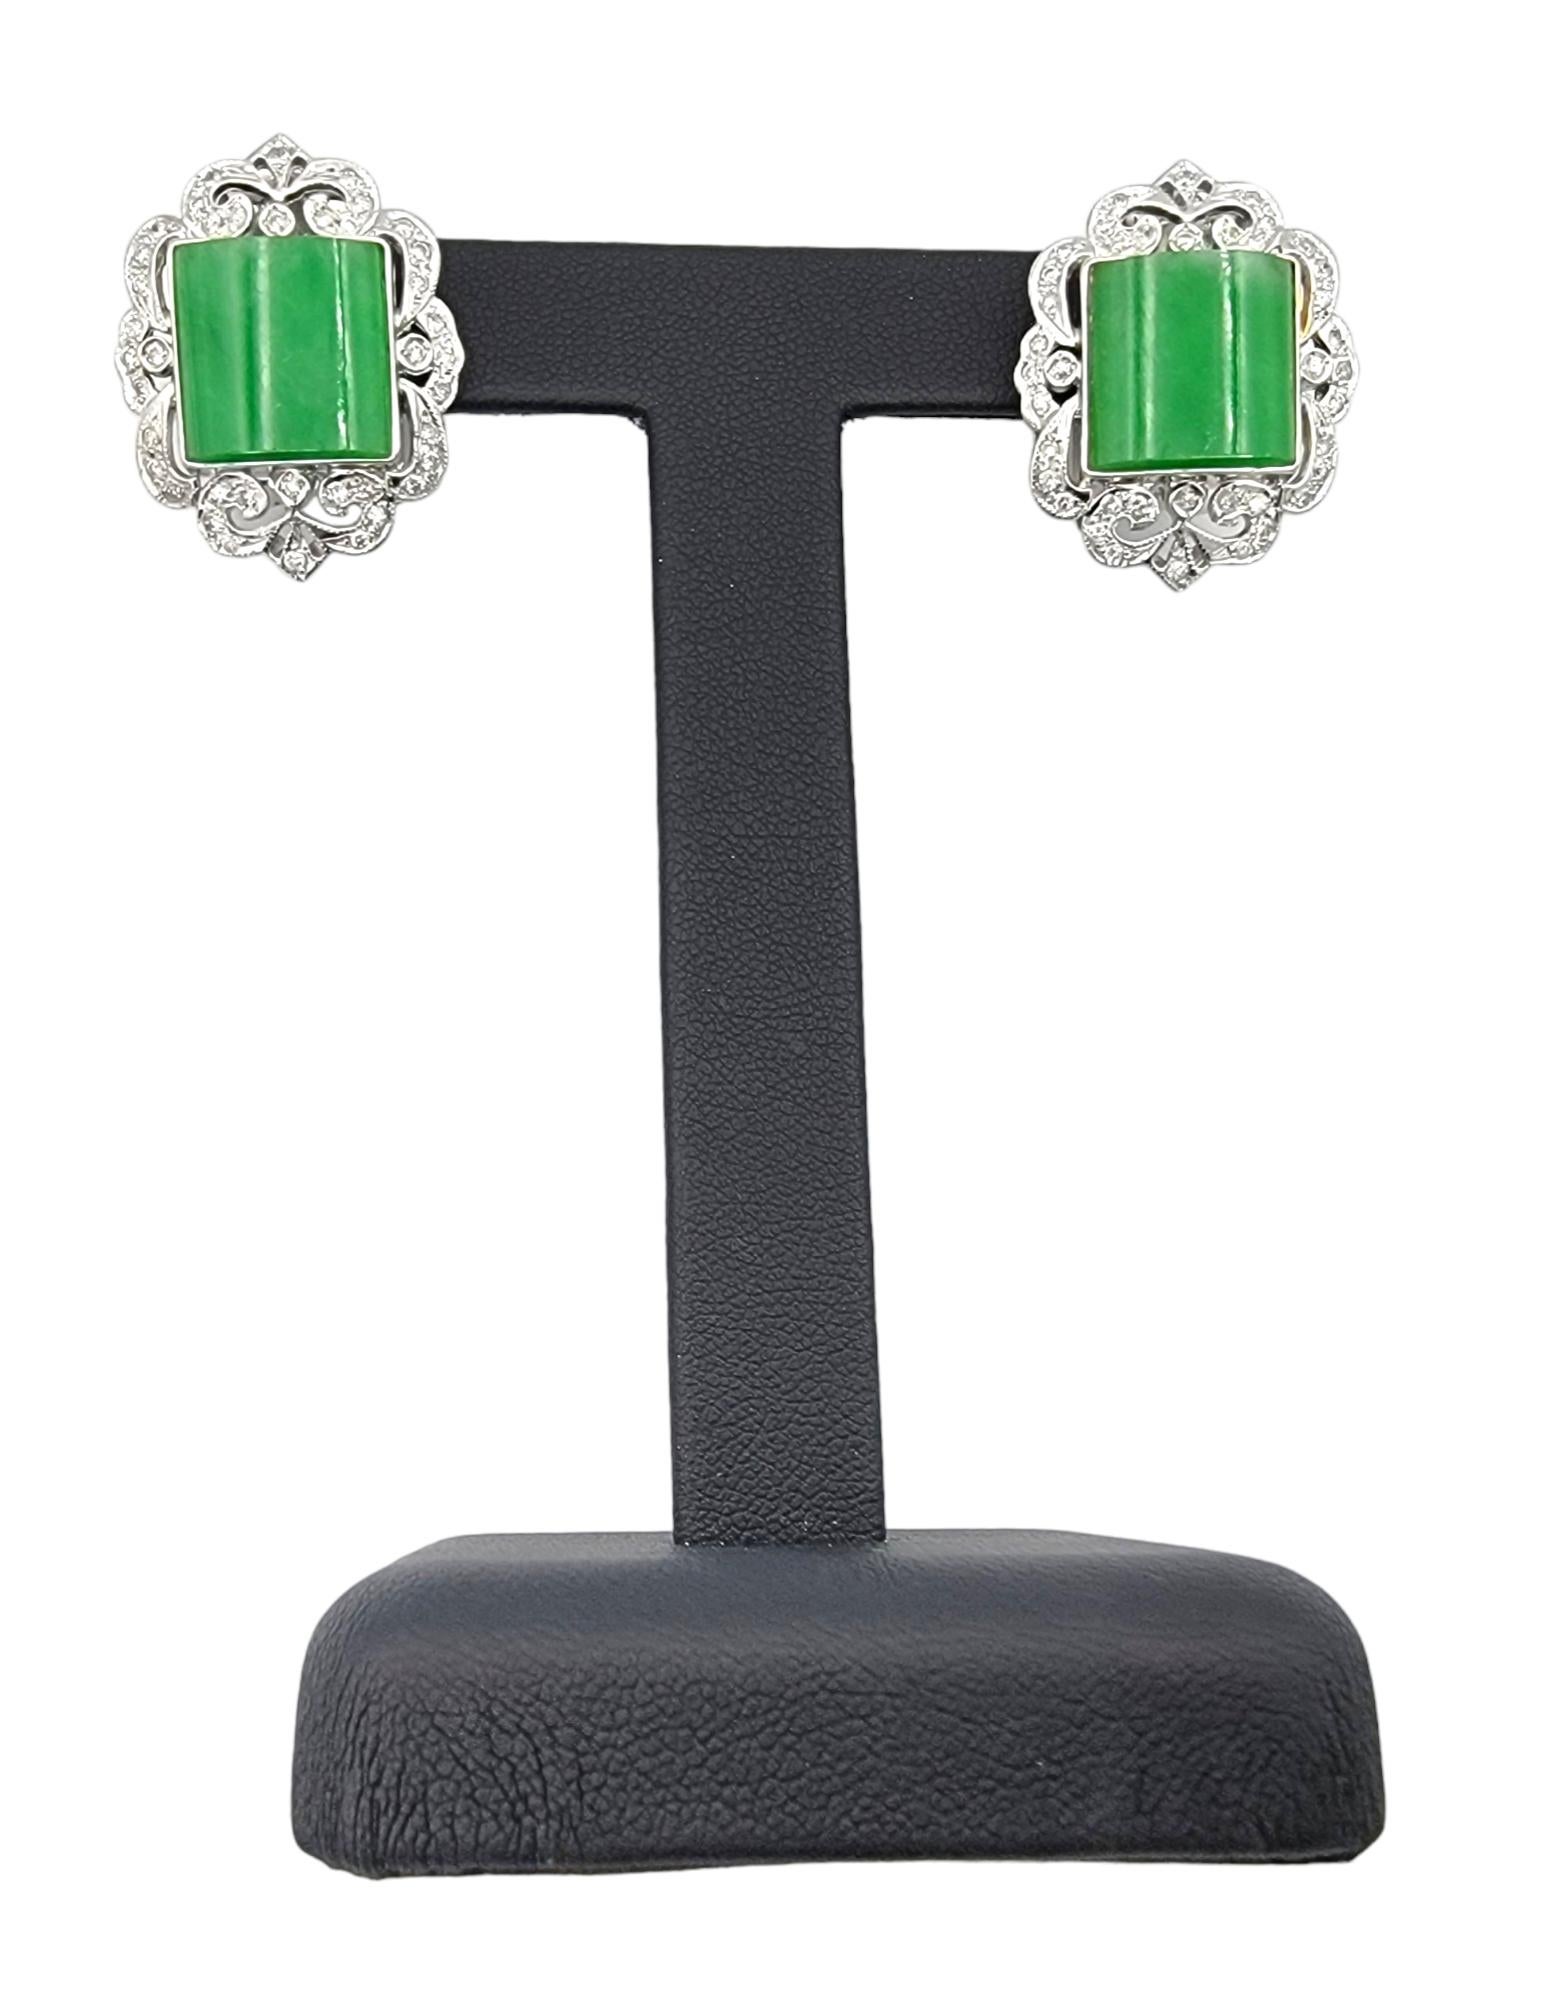 Art Deco Square Cabochon Jadeite and Diamond Earrings Set in 18 Karat White Gold For Sale 3